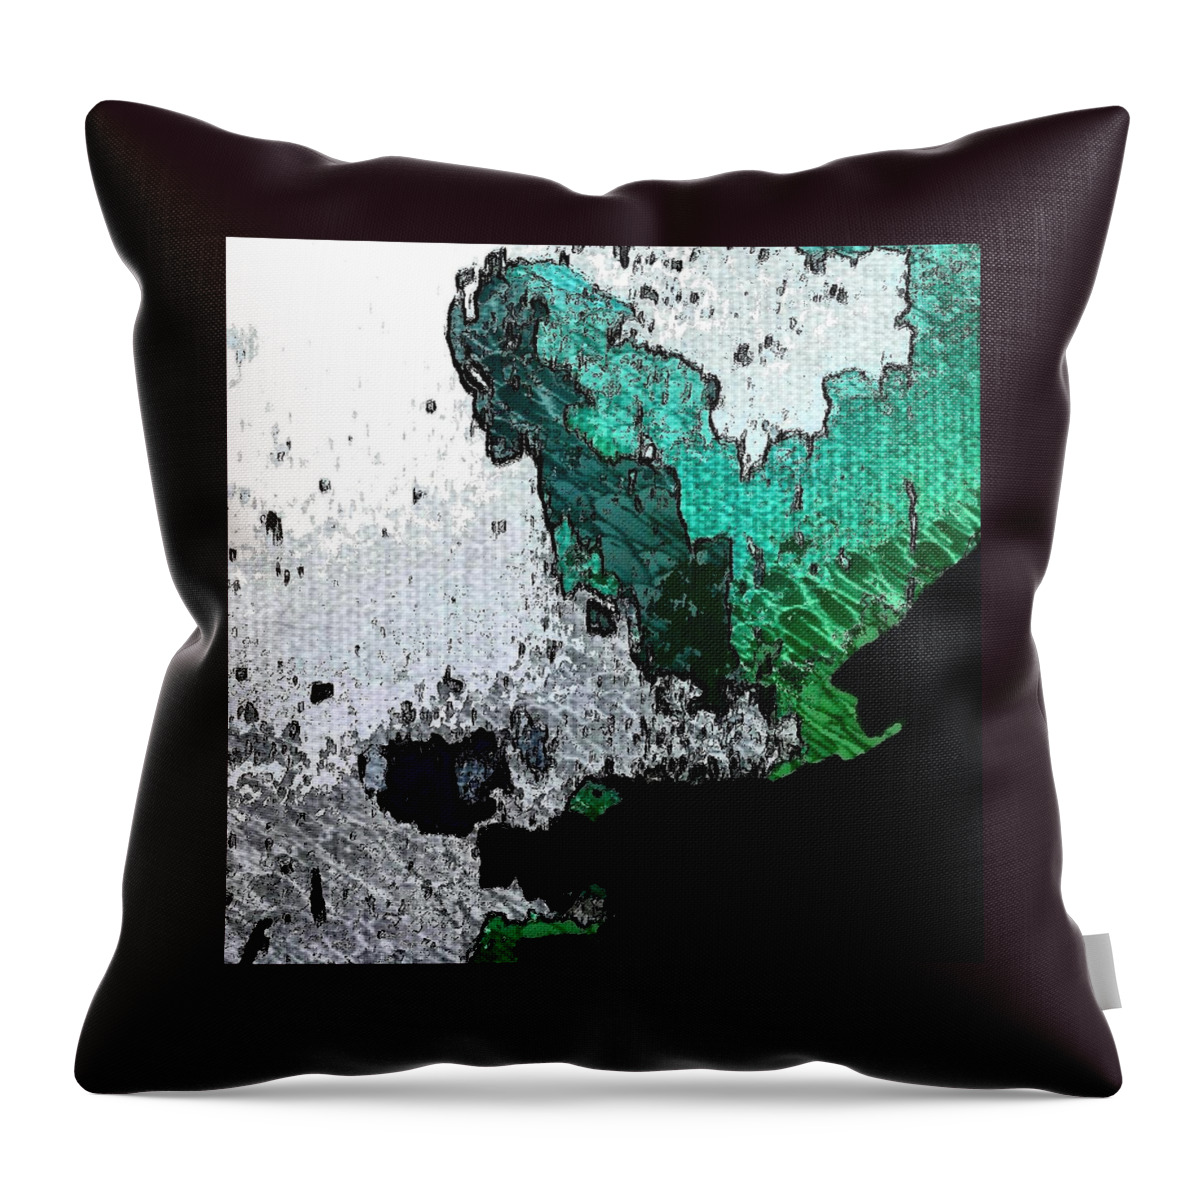 #abstract #art #abstractart #tagsforlikes #abstracters_anonymous #abstract_buff #abstraction #instagood #creative #artsy #beautiful #photooftheday #abstracto #stayabstract #instaabstract Throw Pillow featuring the photograph Green and Black Lamppost by Jason Roust